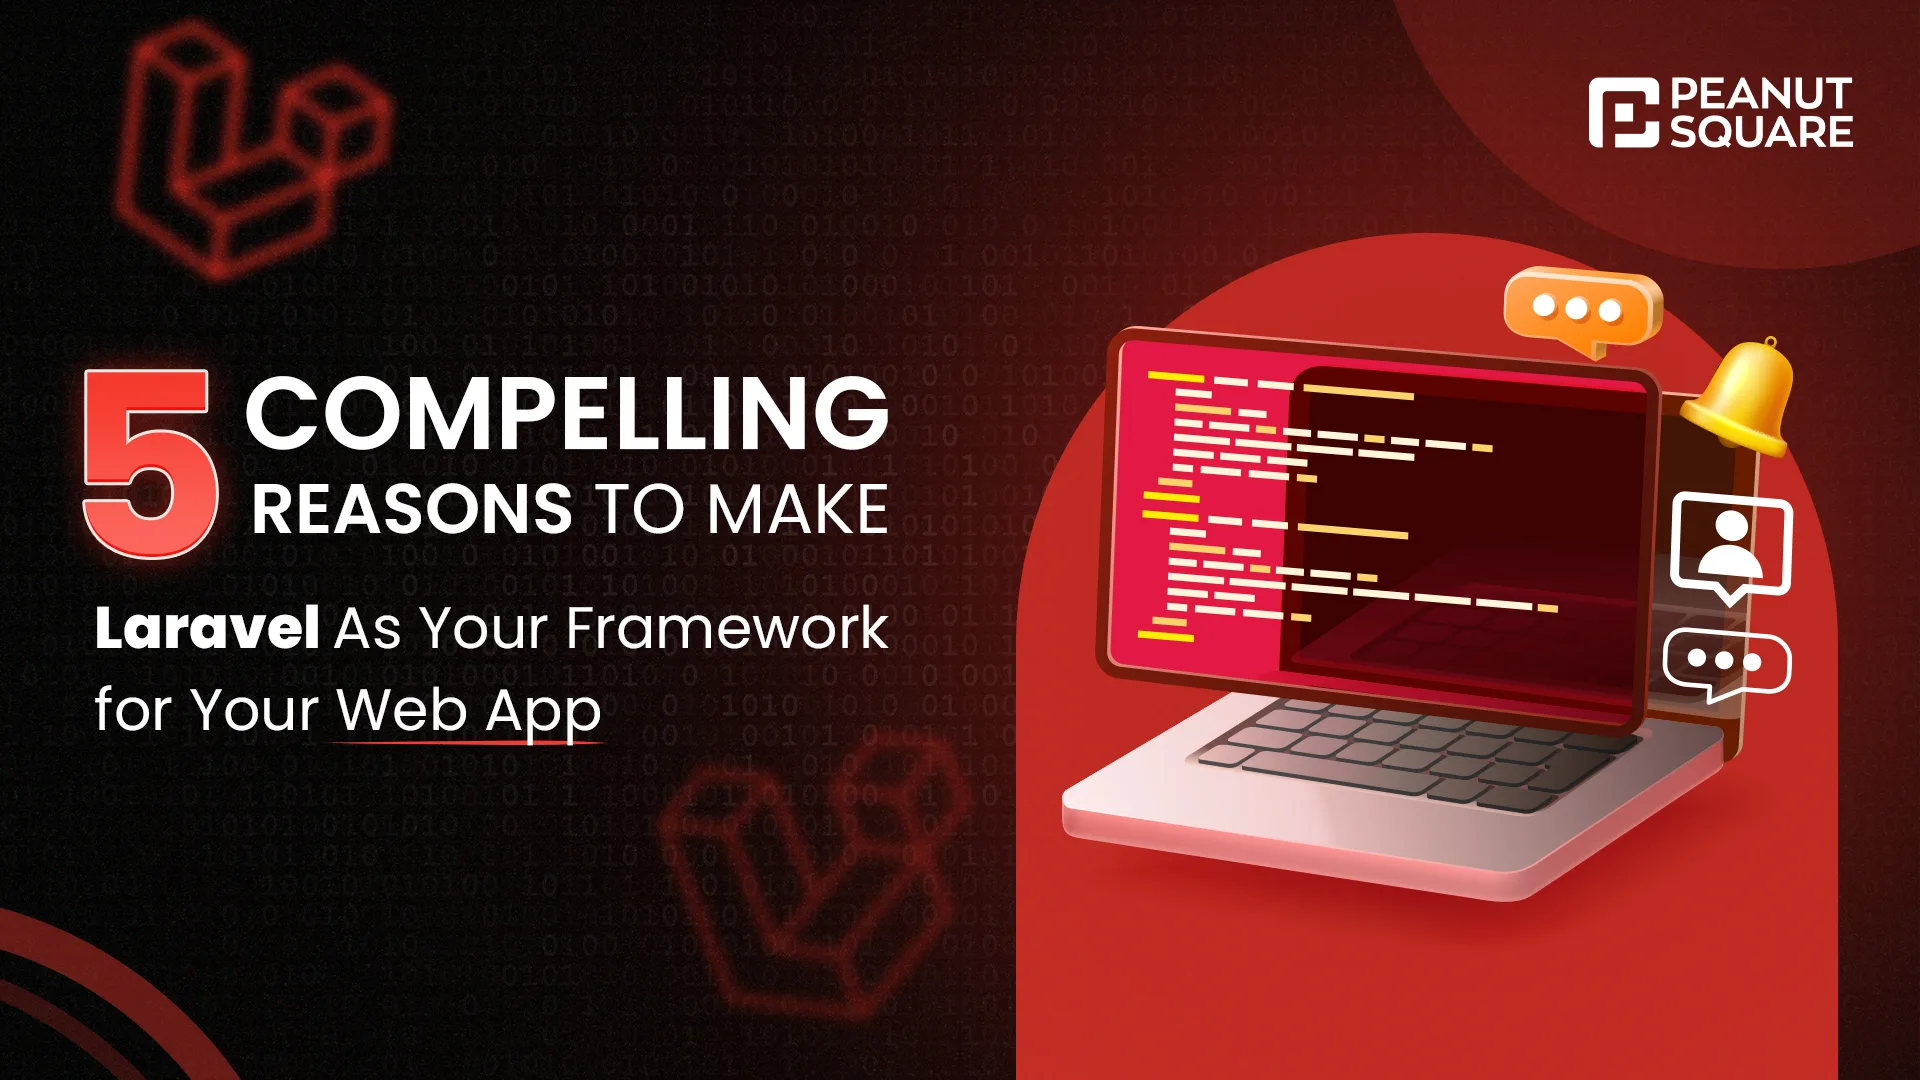 5 Compelling Reasons to Make Laravel As Your Framework for Your Web App